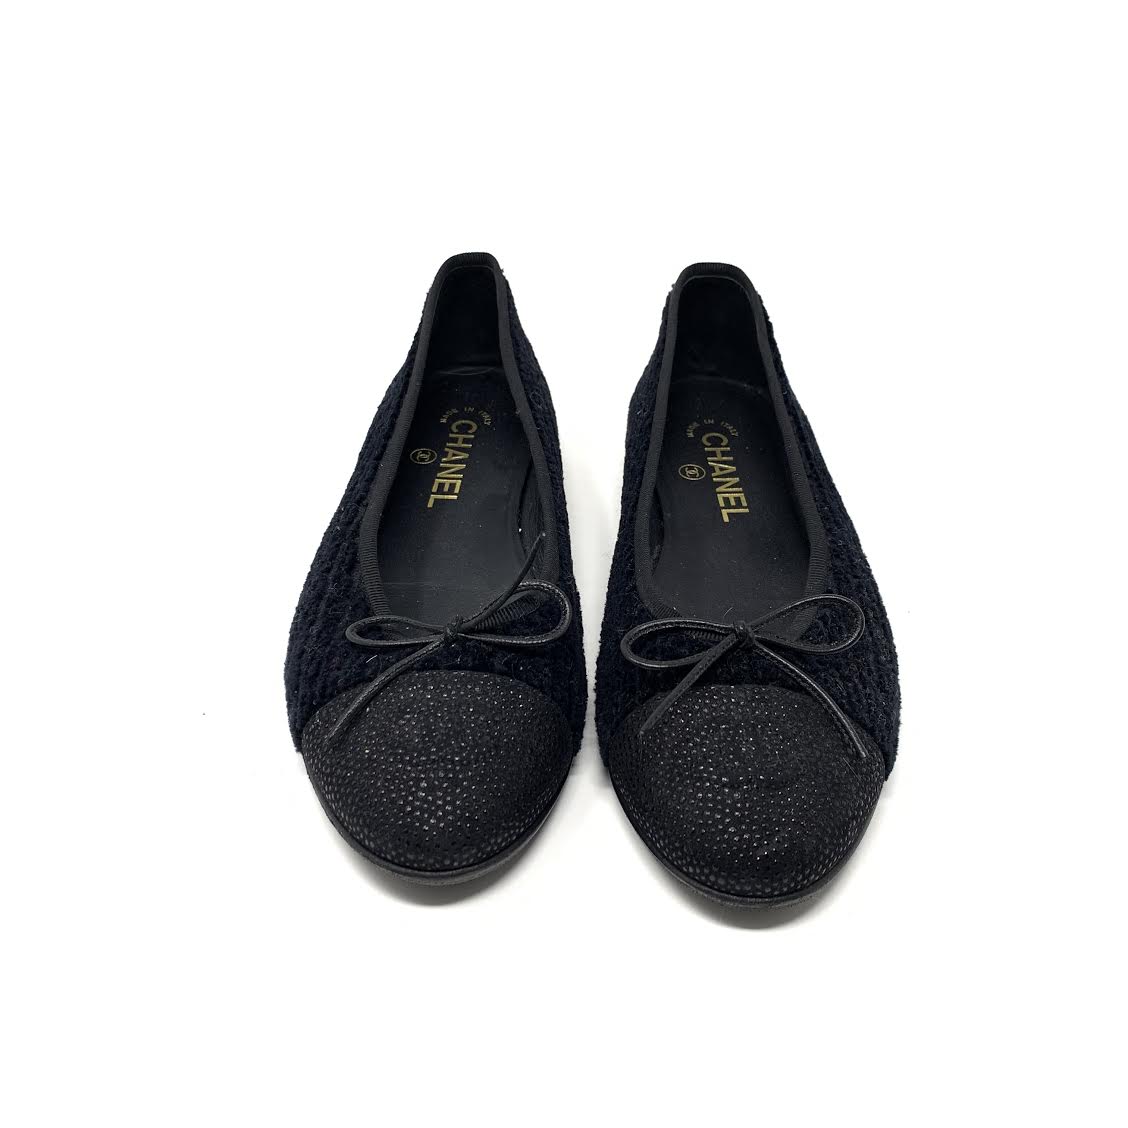 CHANEL, Shoes, Chanel Ballet Flats Size 38